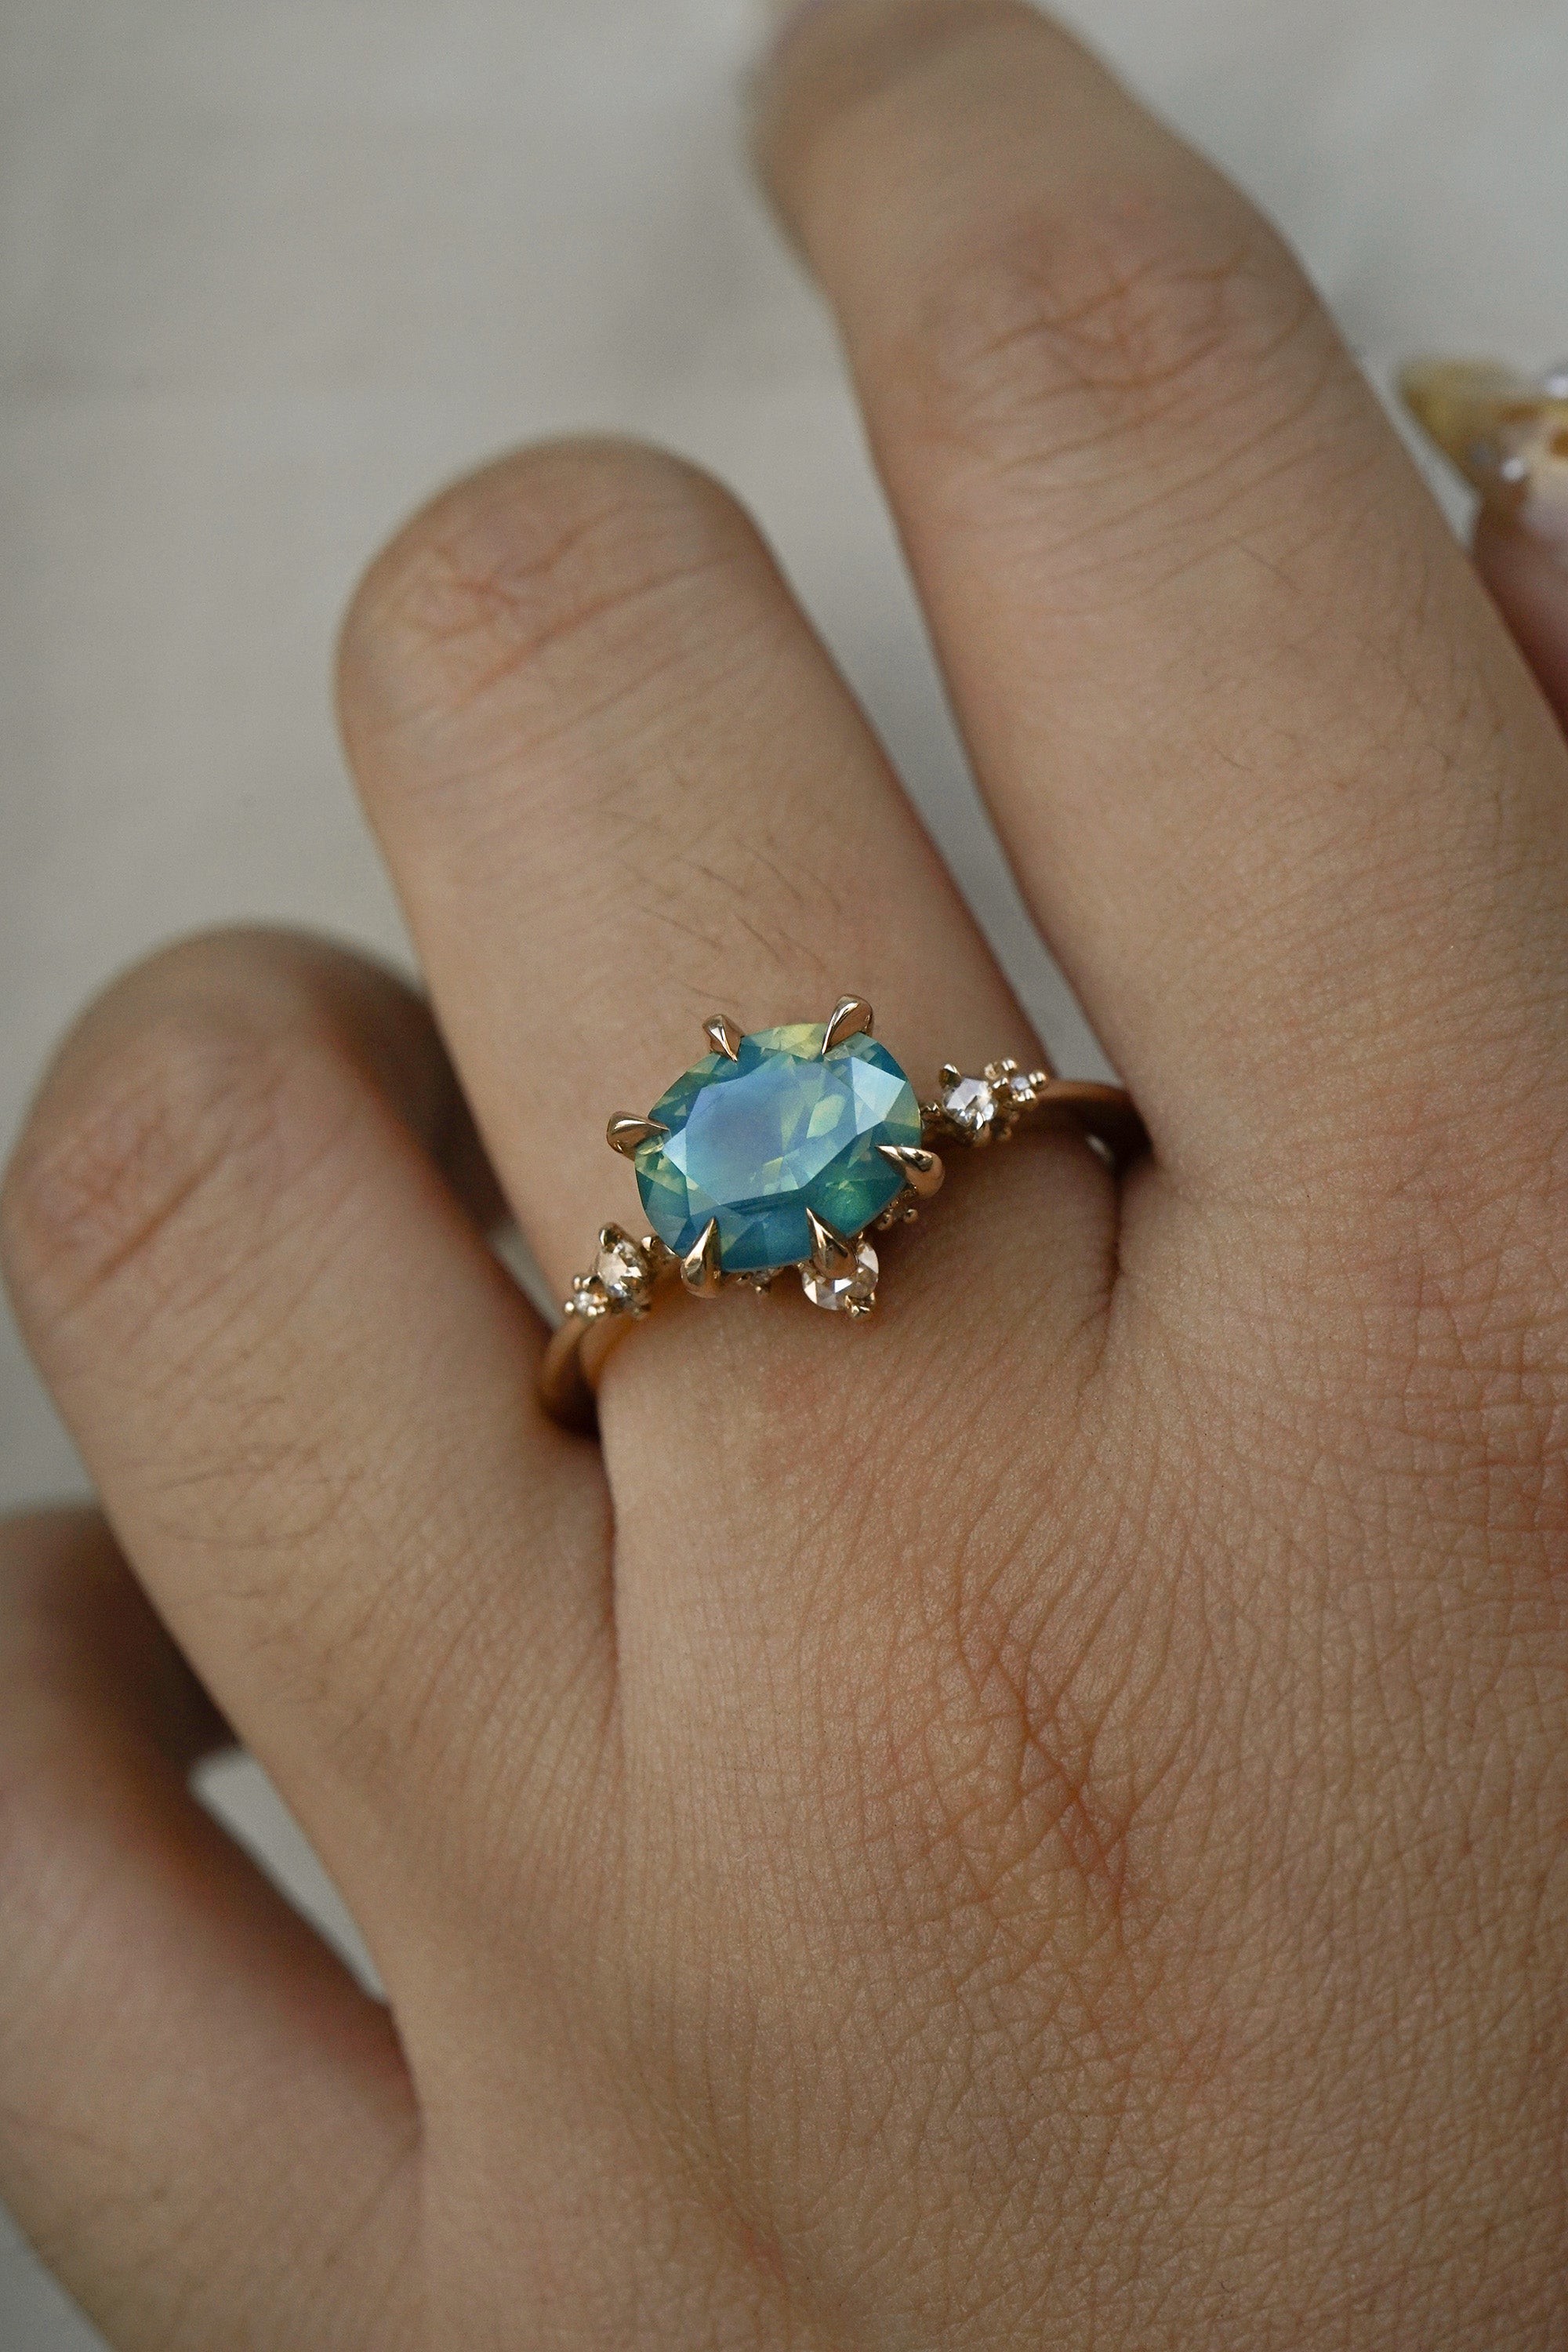 A delicate and ethereal "Nereid" one of a kind engagement ring by Laurie Fleming Jewellery, with a unique opalescent silky teal/turquoise/blue sapphire in an oval cut. The band is adorned with rose and brilliant cut diamonds and the ring is made in solid 14k yellow gold. The ring is worn on a hand against a plain lgiht grey background.